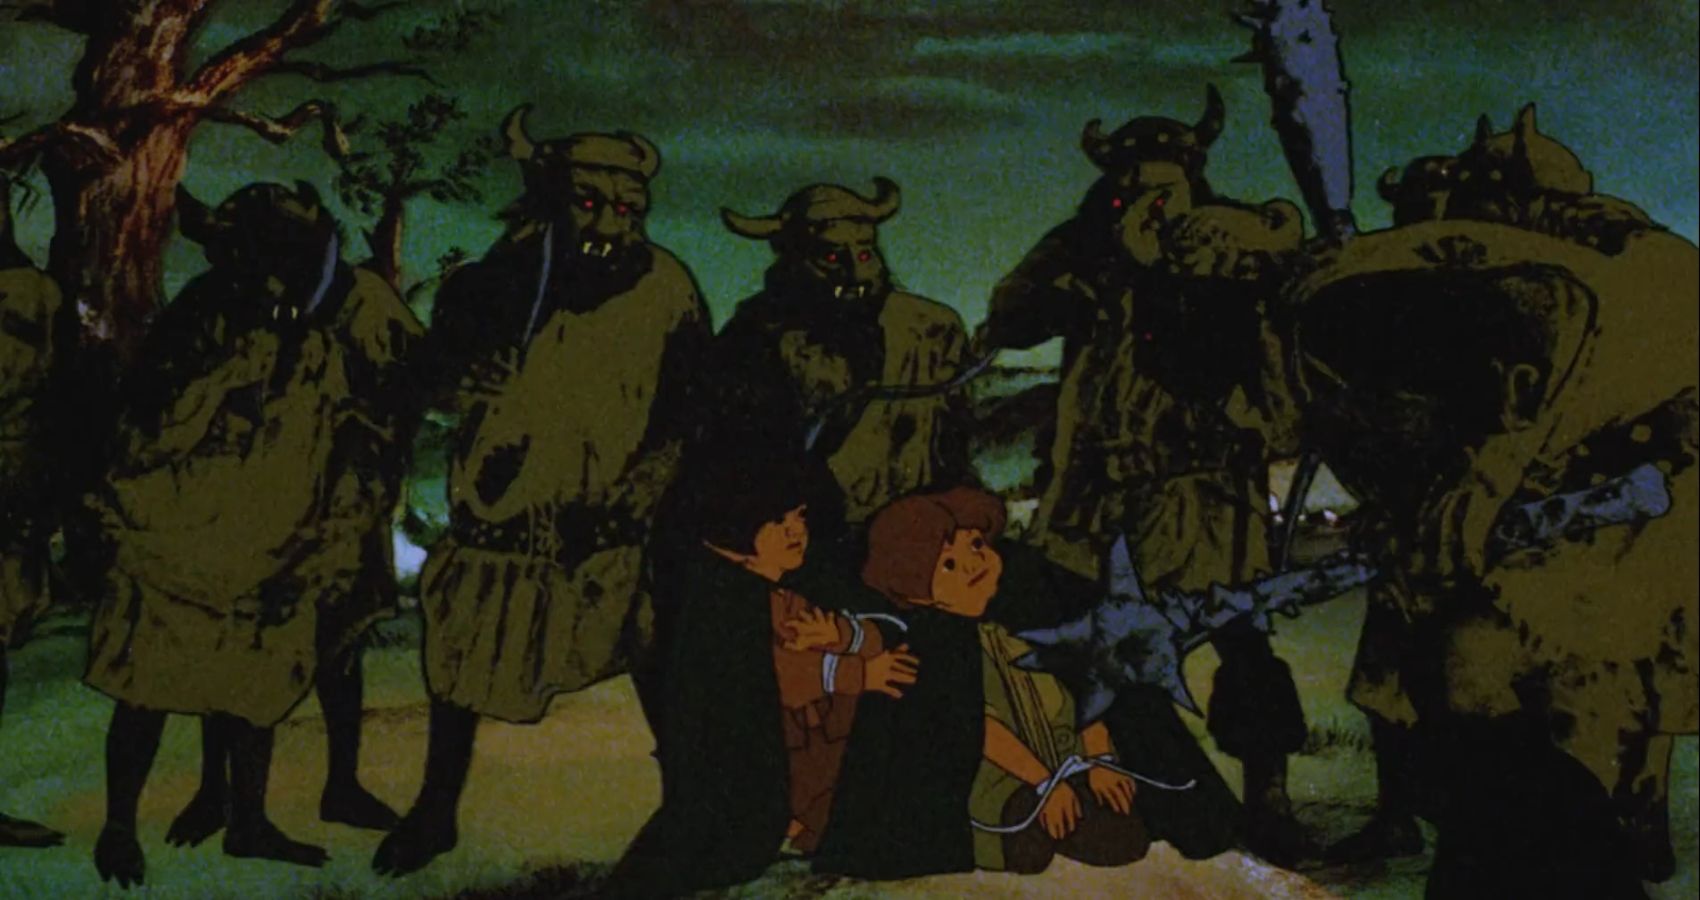 Pippin and Merry are kidnapped by orcs in Ralph Bakshi's The Lord of the Rings